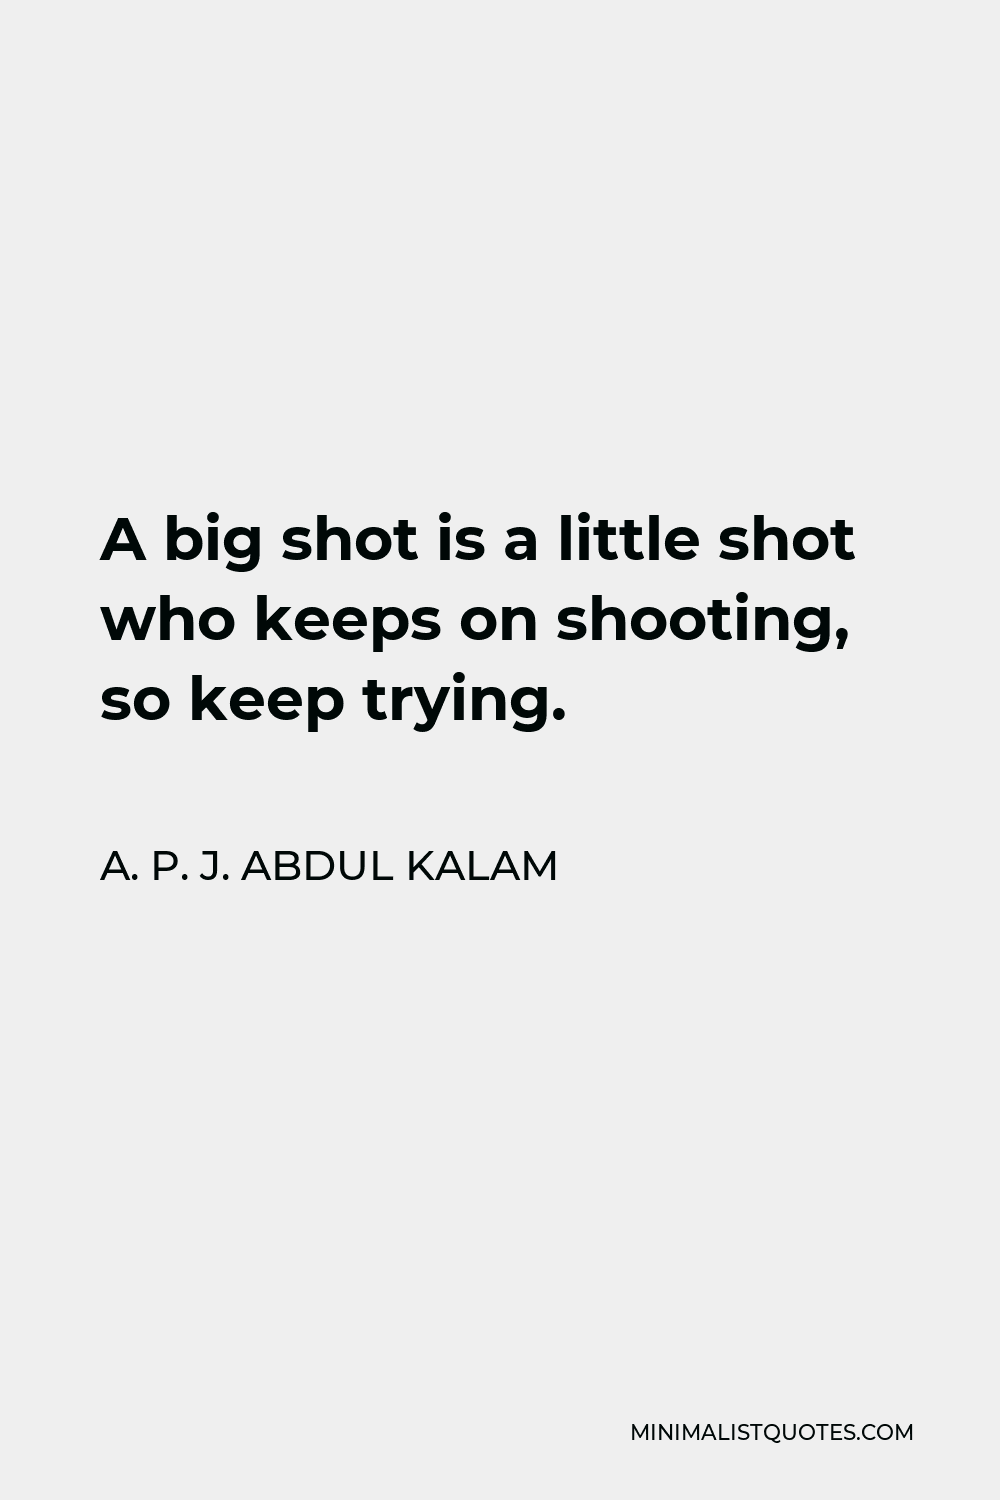 A. P. J. Abdul Kalam Quote - A big shot is a little shot who keeps on shooting, so keep trying.